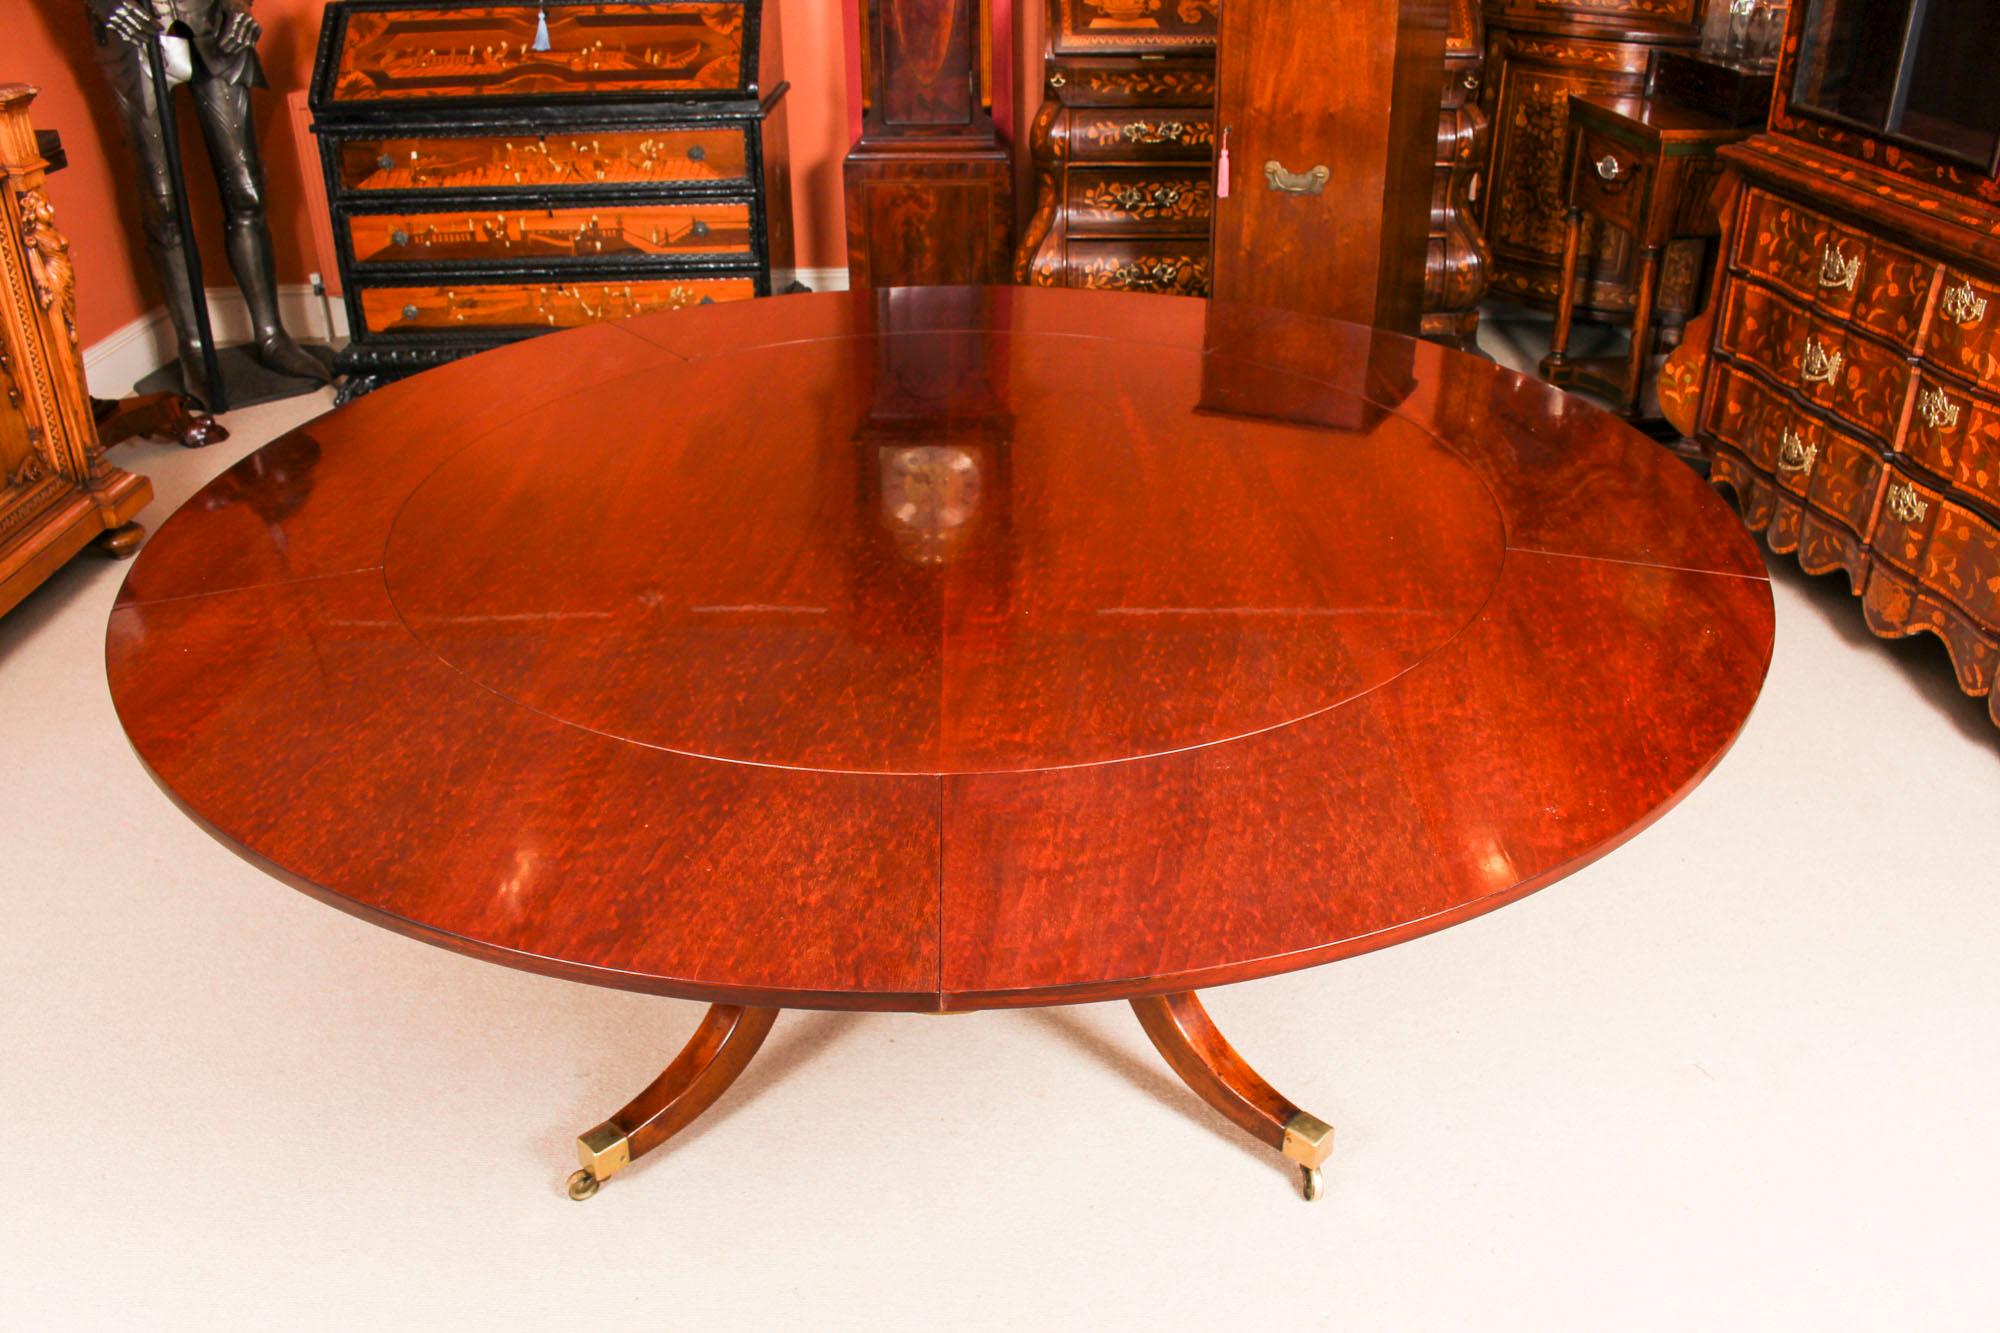 Regency Revival Vintage Mahogany Jupe Dining Table, Leaf Cabinet and 8 Chairs